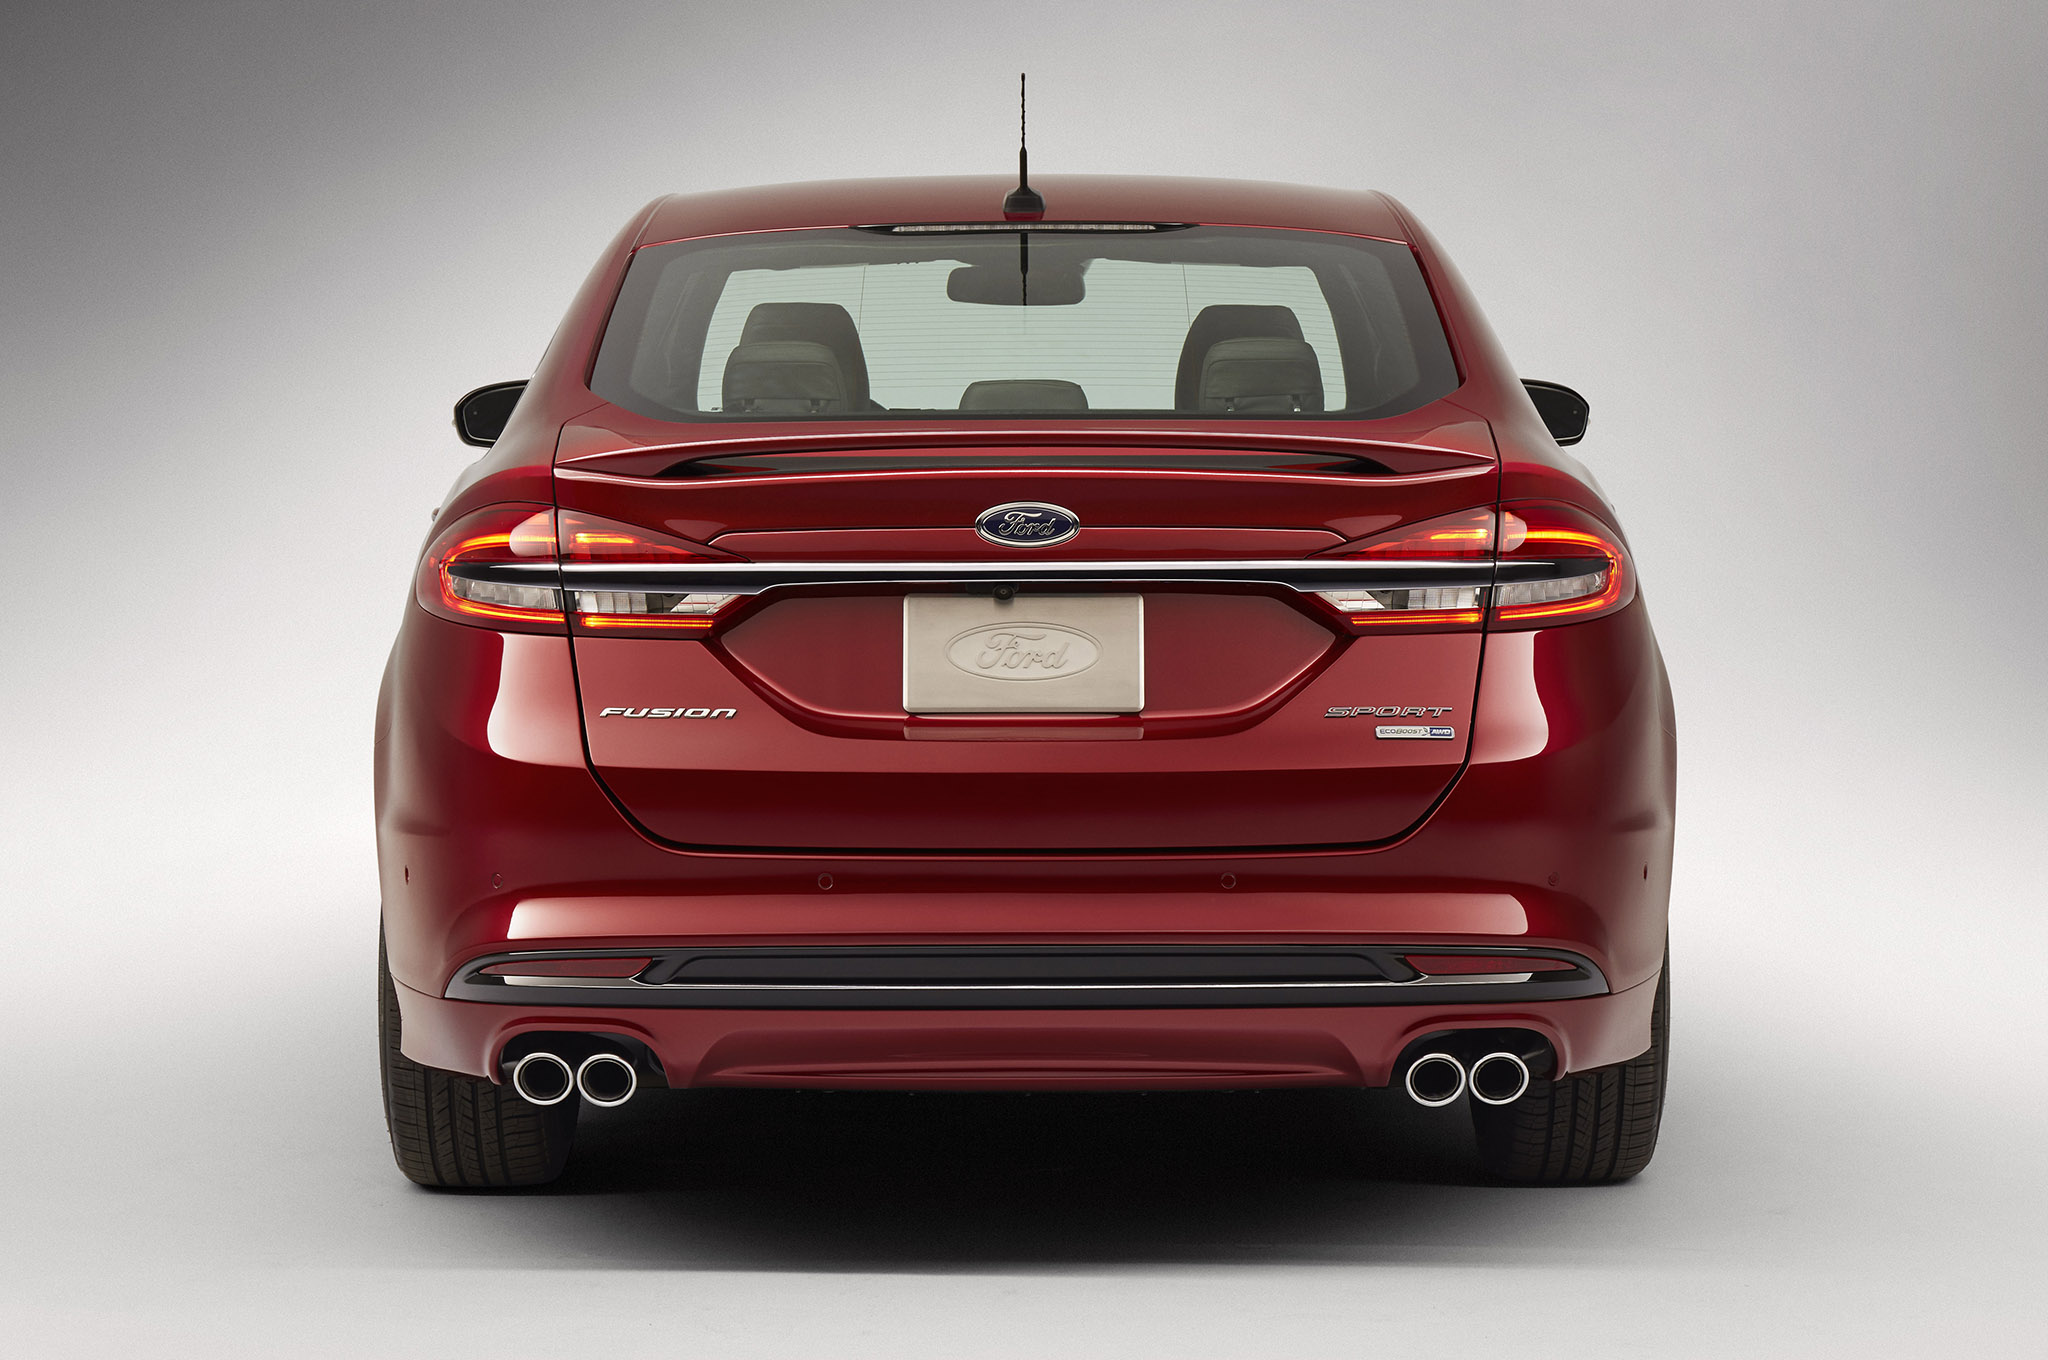 , 2017-Ford-Fusion-Sport-rear-end: 2017-Ford-Fusion-Sport-rear-end